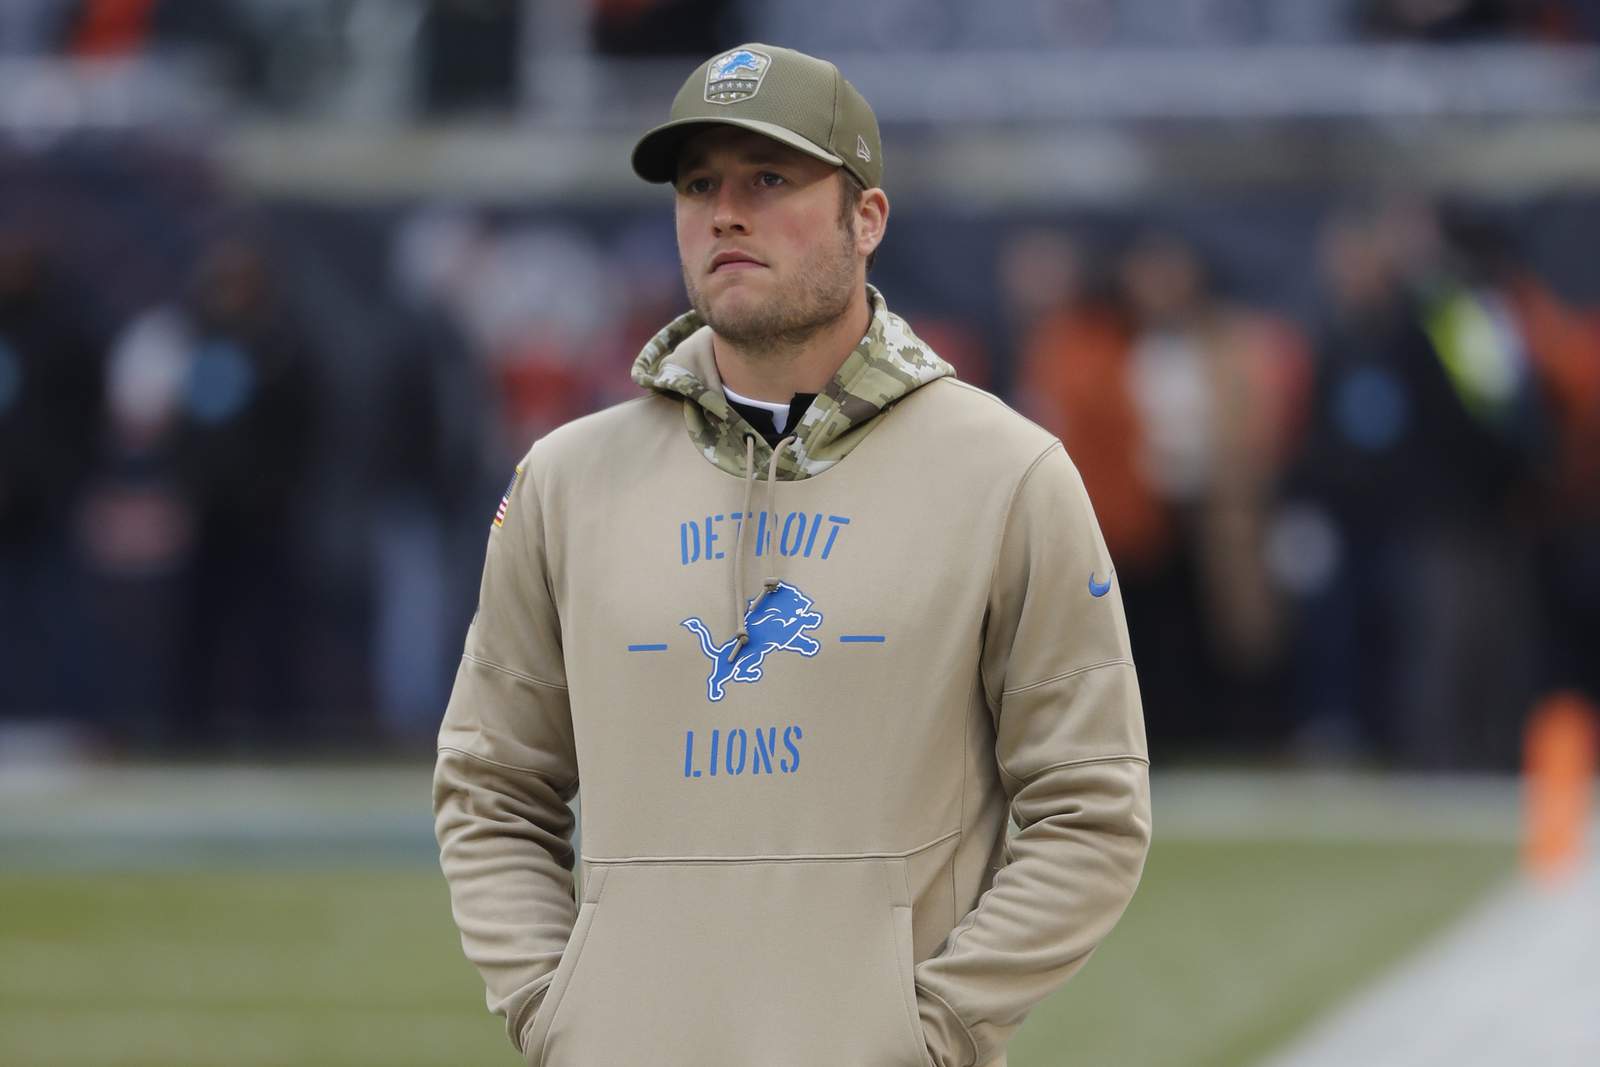 Detroit Lions reportedly trade Matthew Stafford to Rams for 3 draft picks, QB Jared Goff